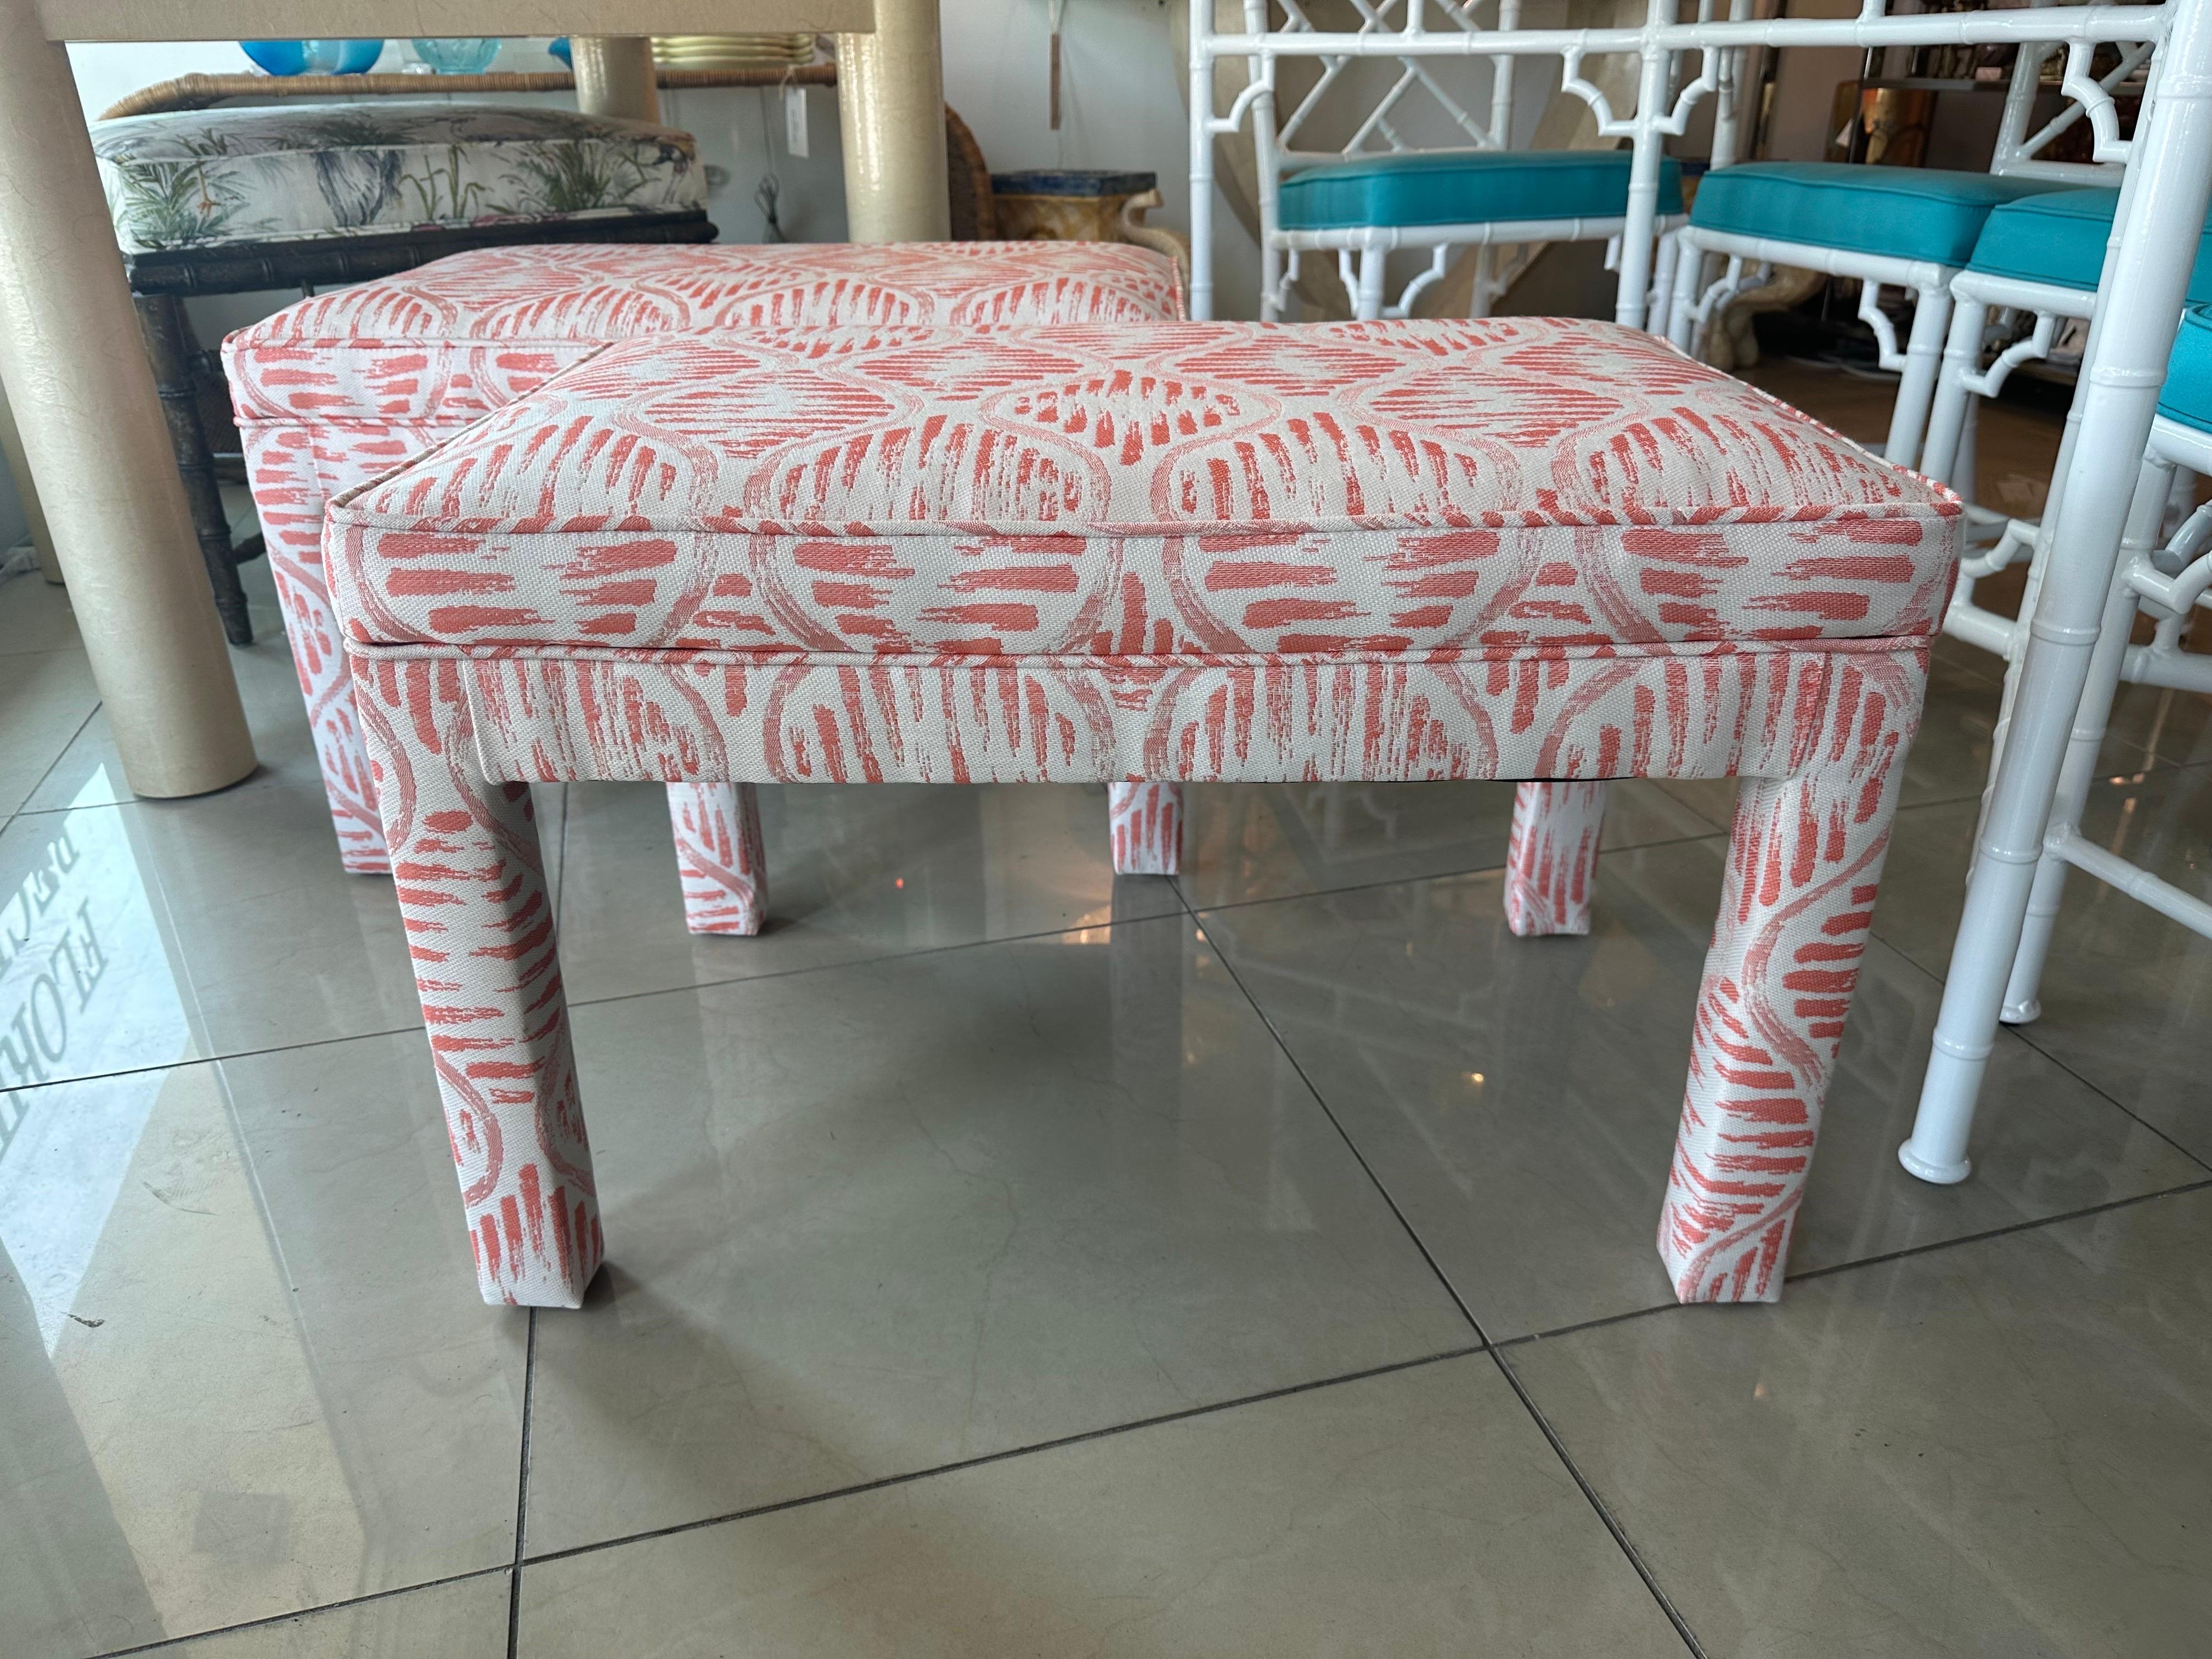 Vintage pair of 1970s parsons stools, benches, ottomans. Newly upholstered in a. fabulous coral fabric. Dimensions: 18.5 H x 29 W x 18.5 D.